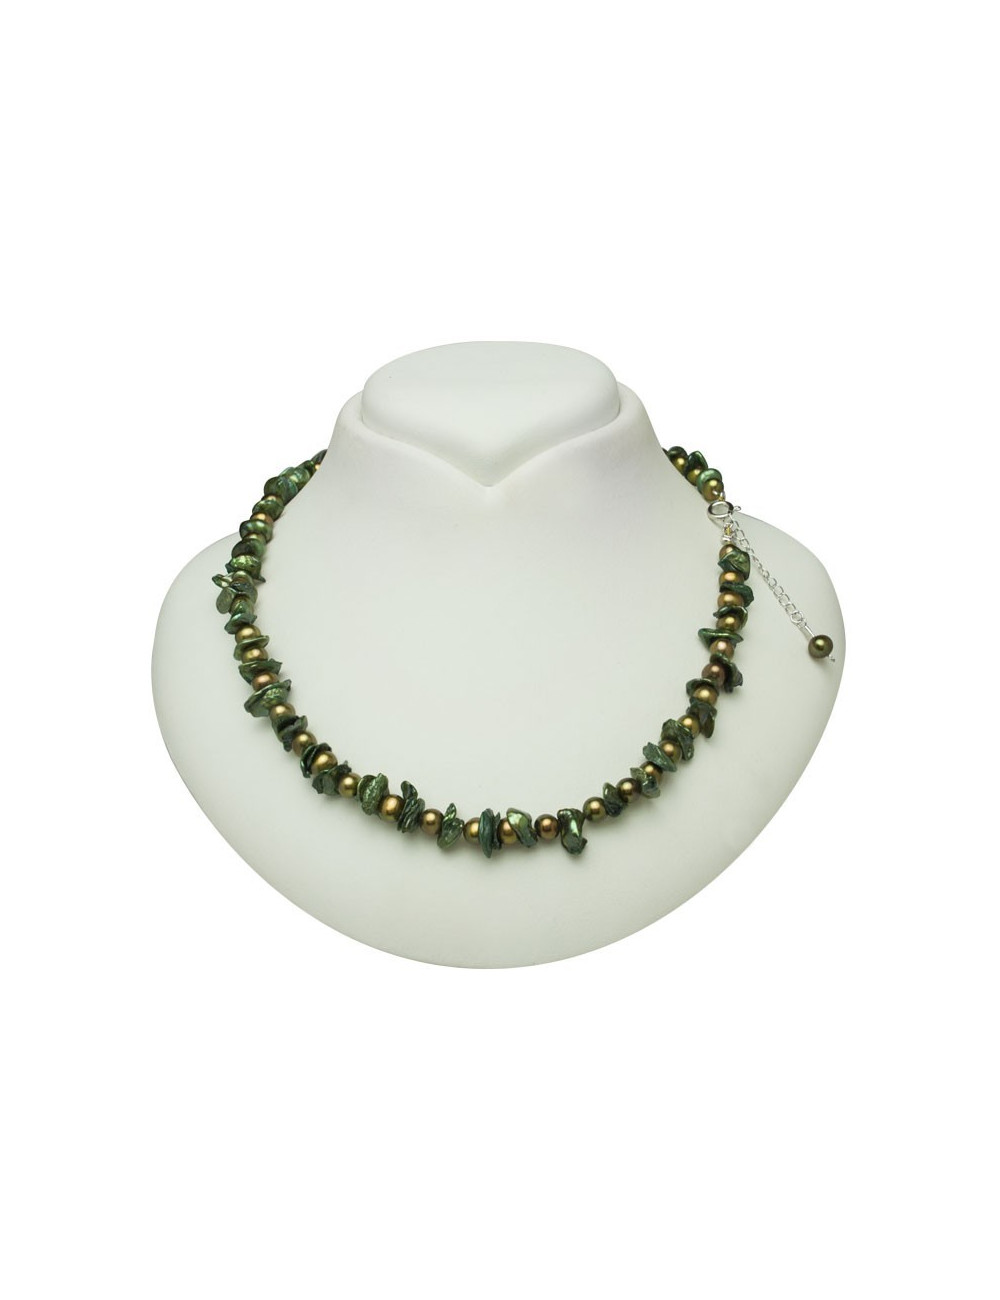 Necklace with pearls in a green shade NŁU5060S1